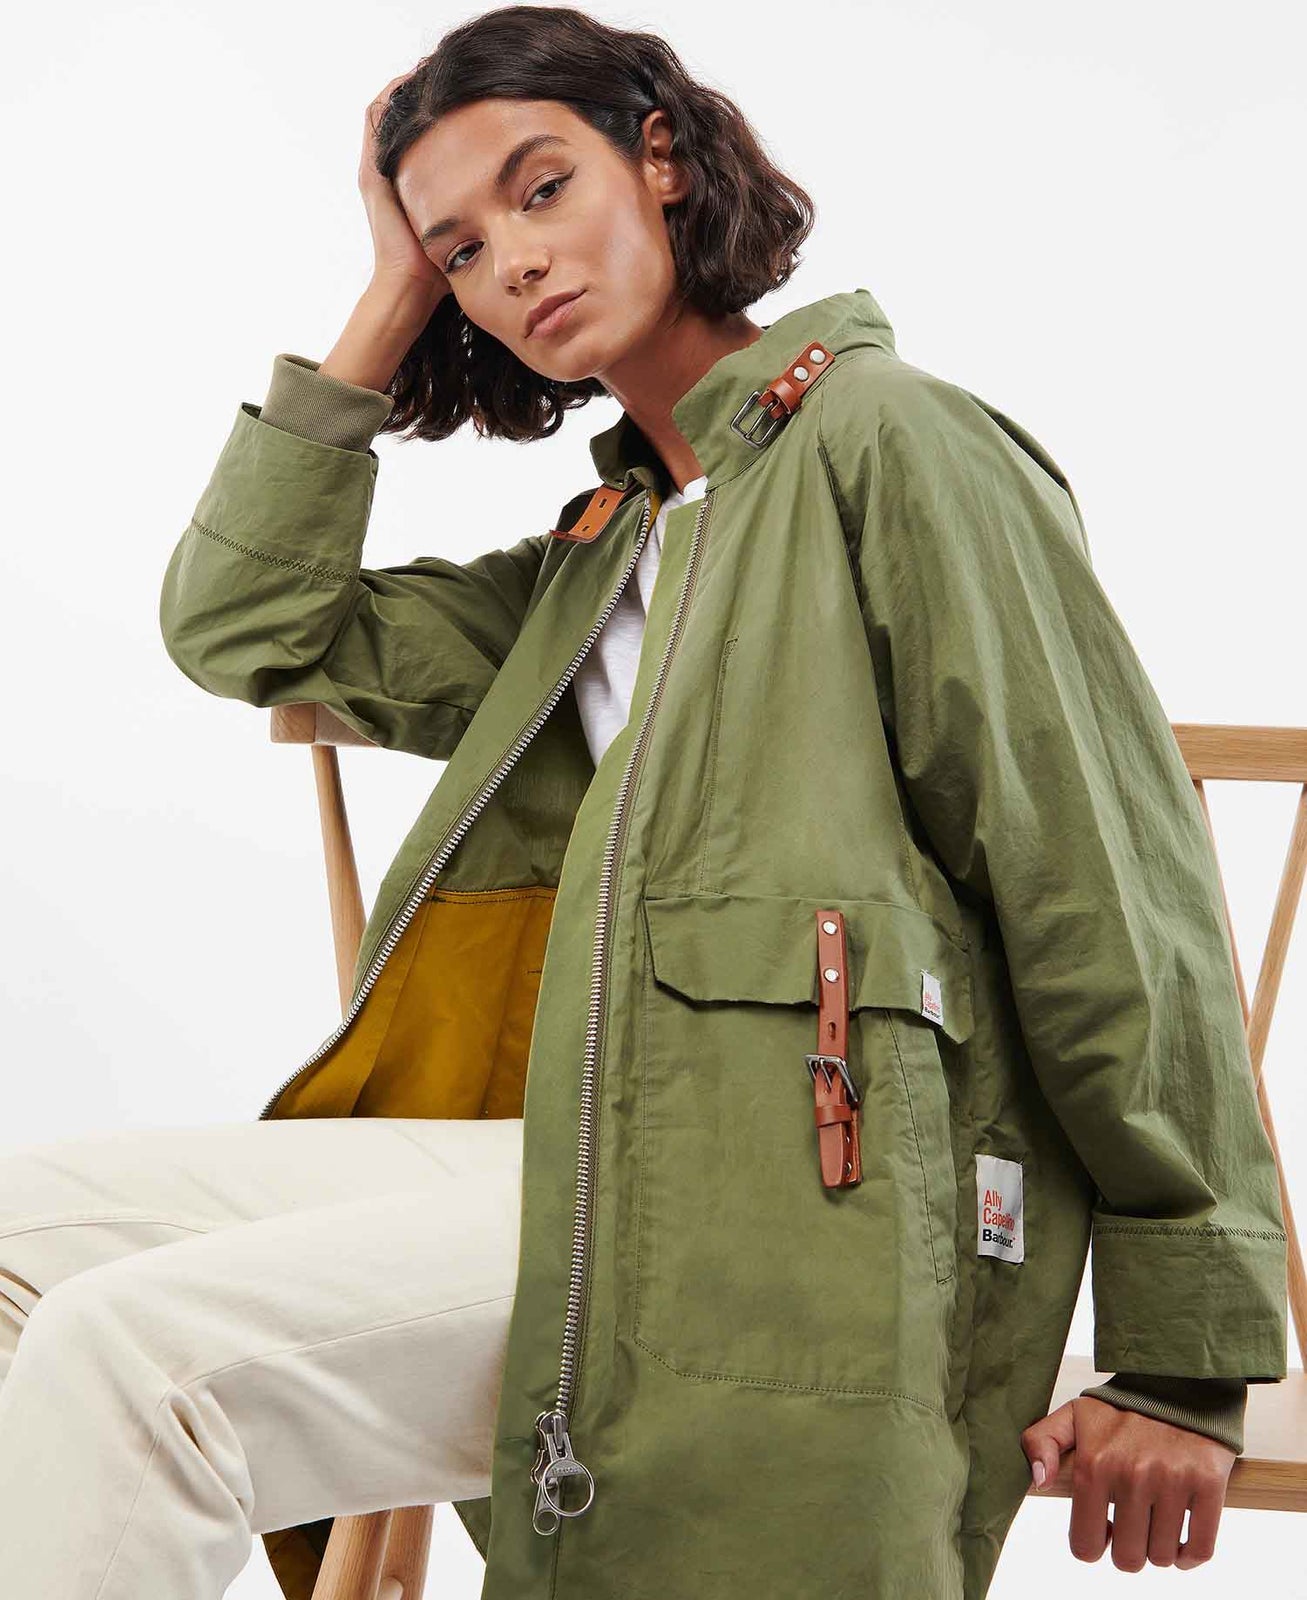 Ally Capellino x Barbour Lassie Waxed Cotton Jacket in Army Green